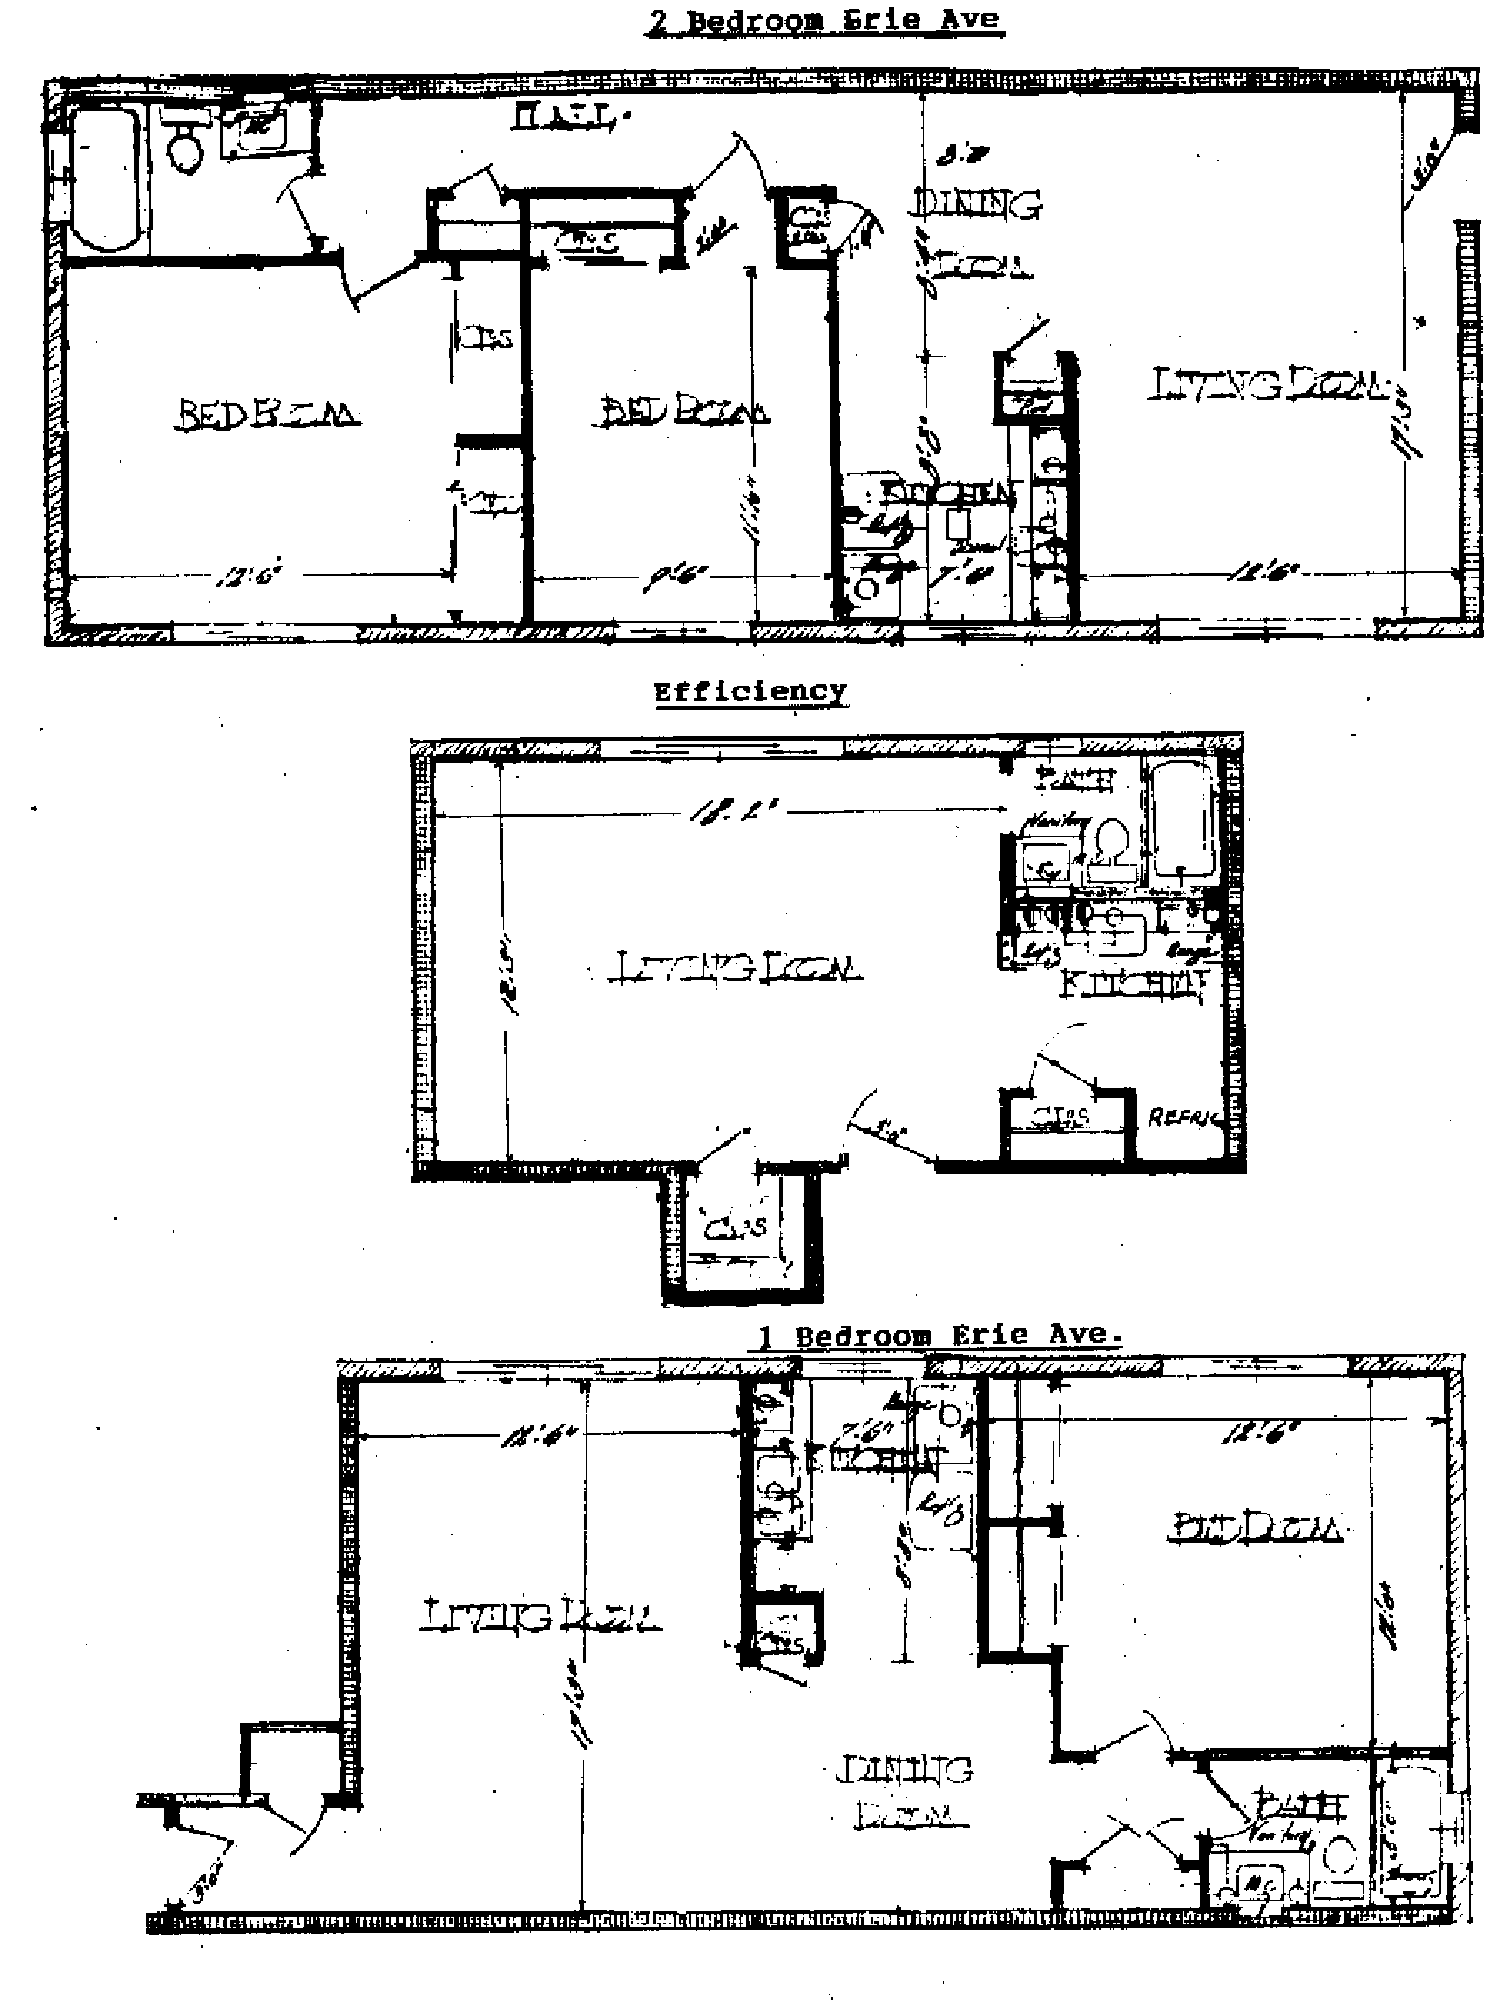 APARTMENT LAYOUT